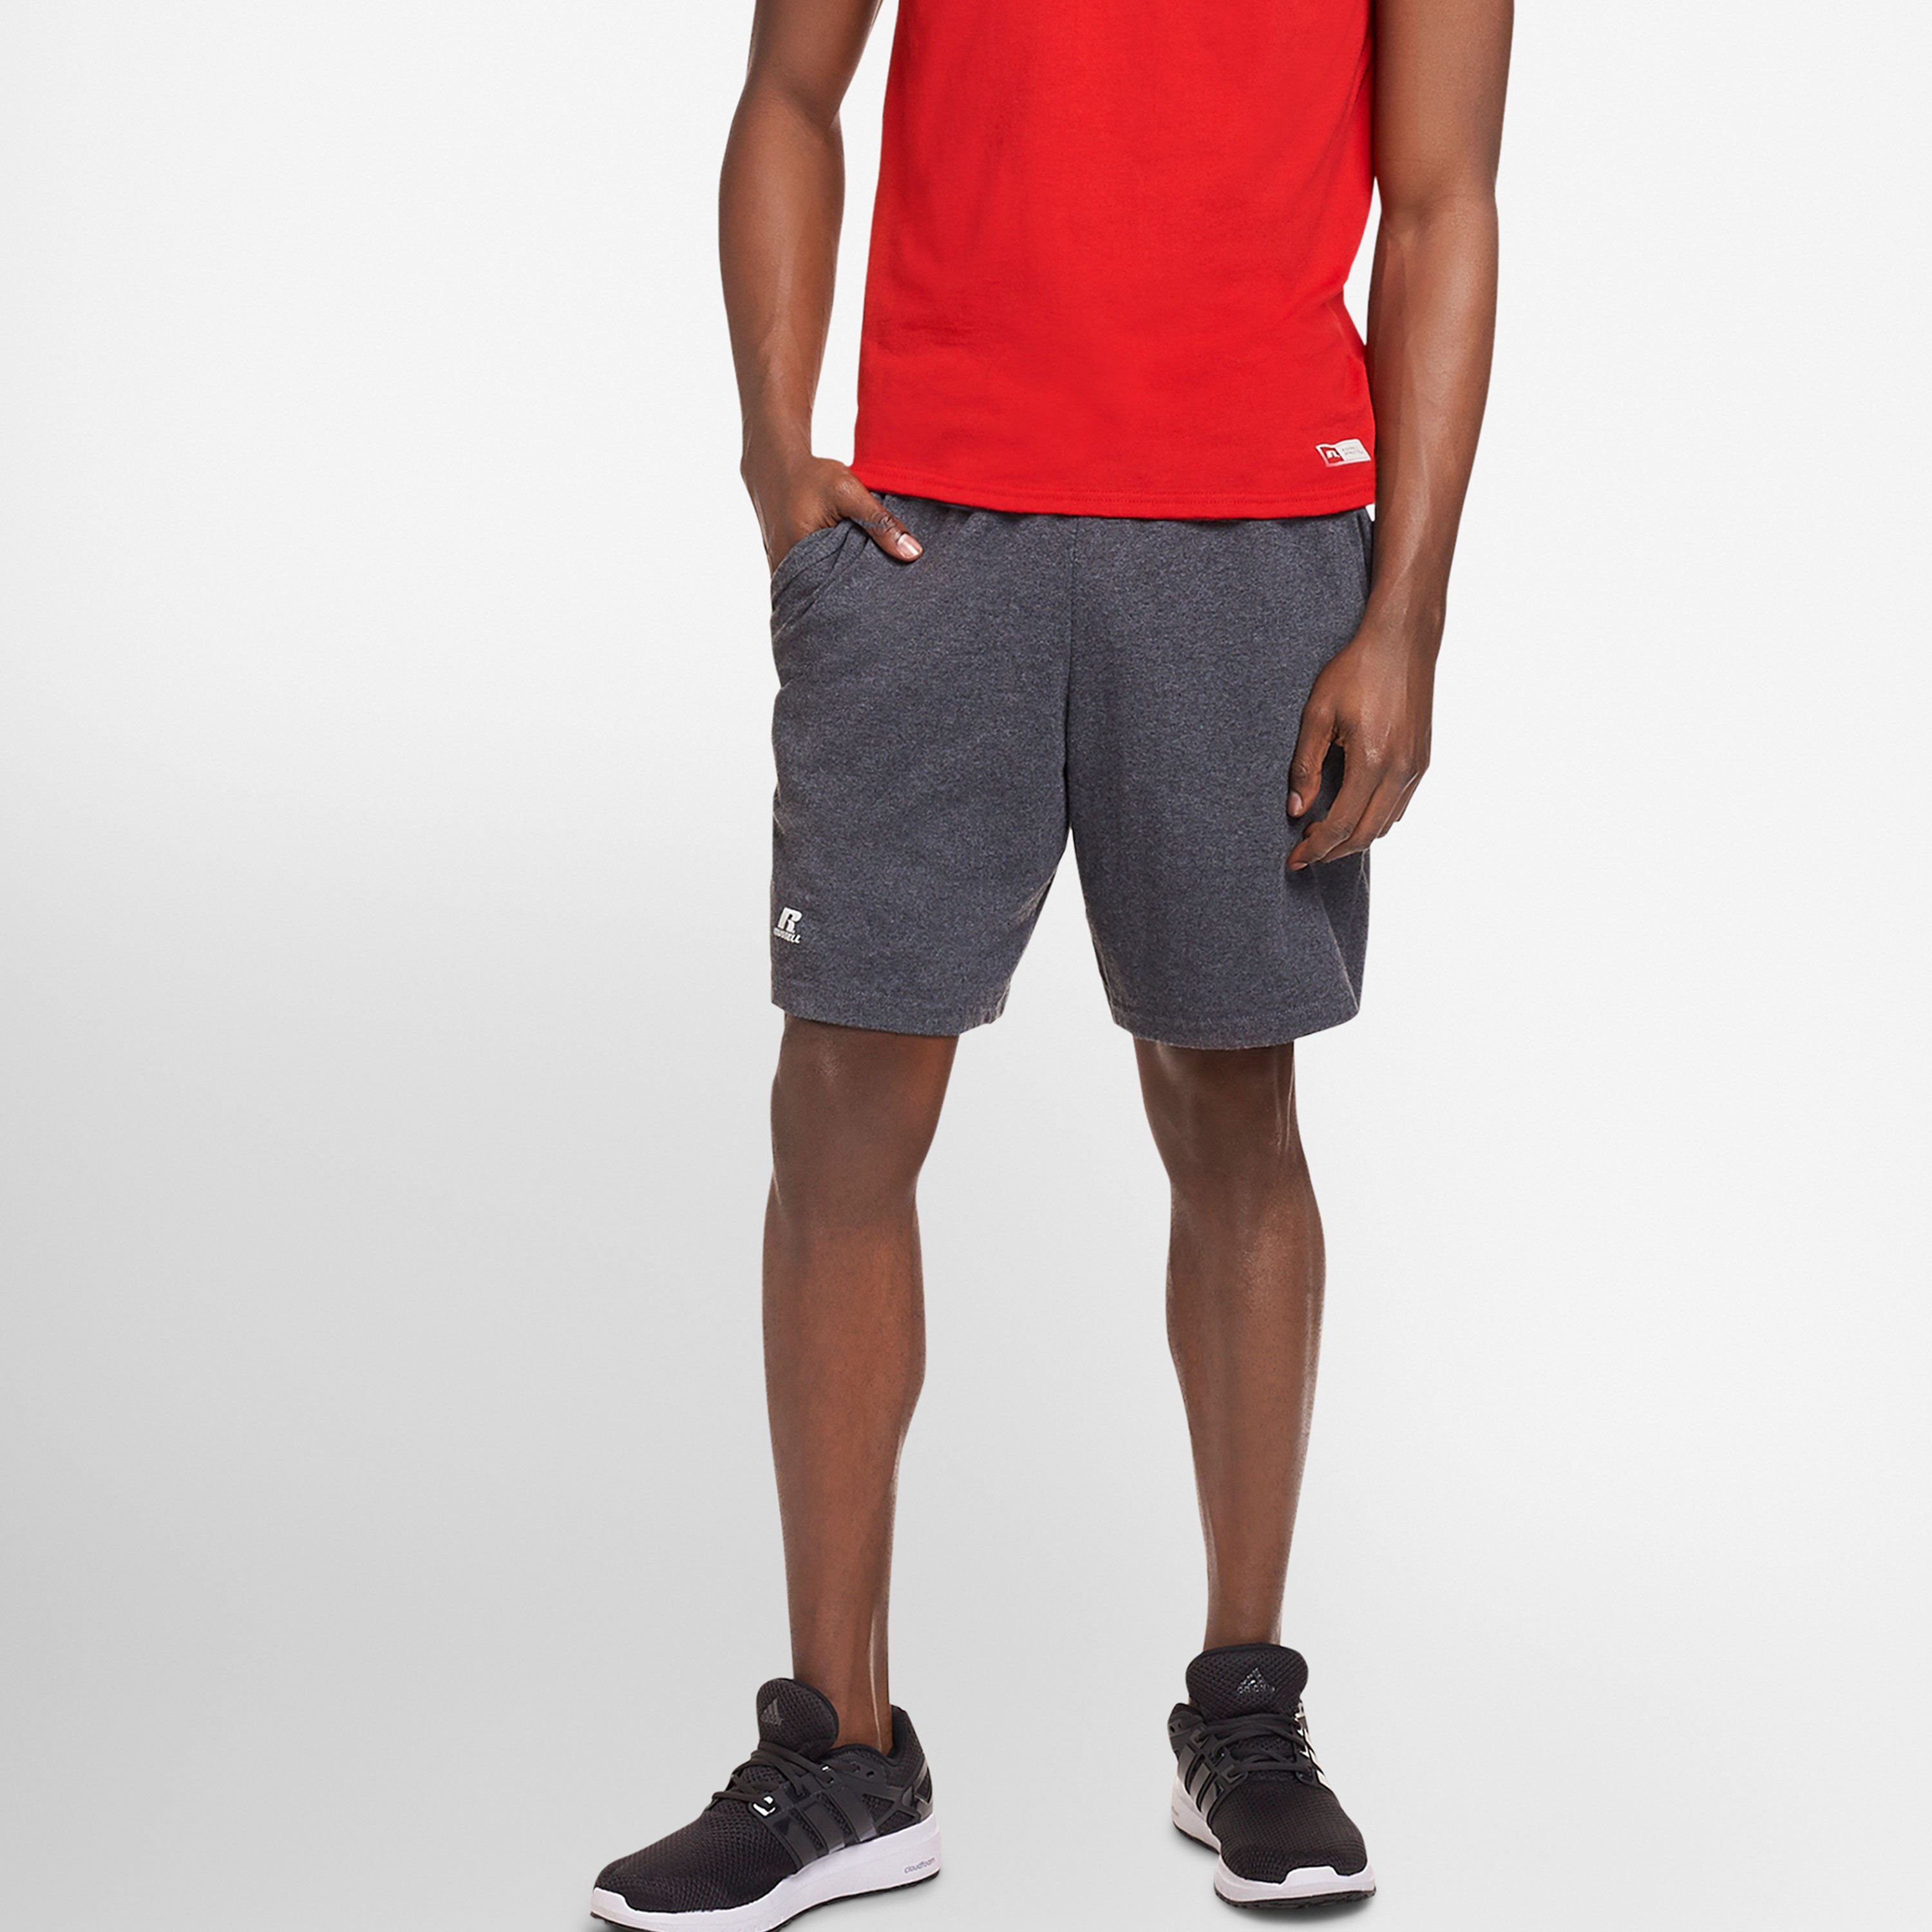 Men's Cotton Jersey Shorts with Pockets 